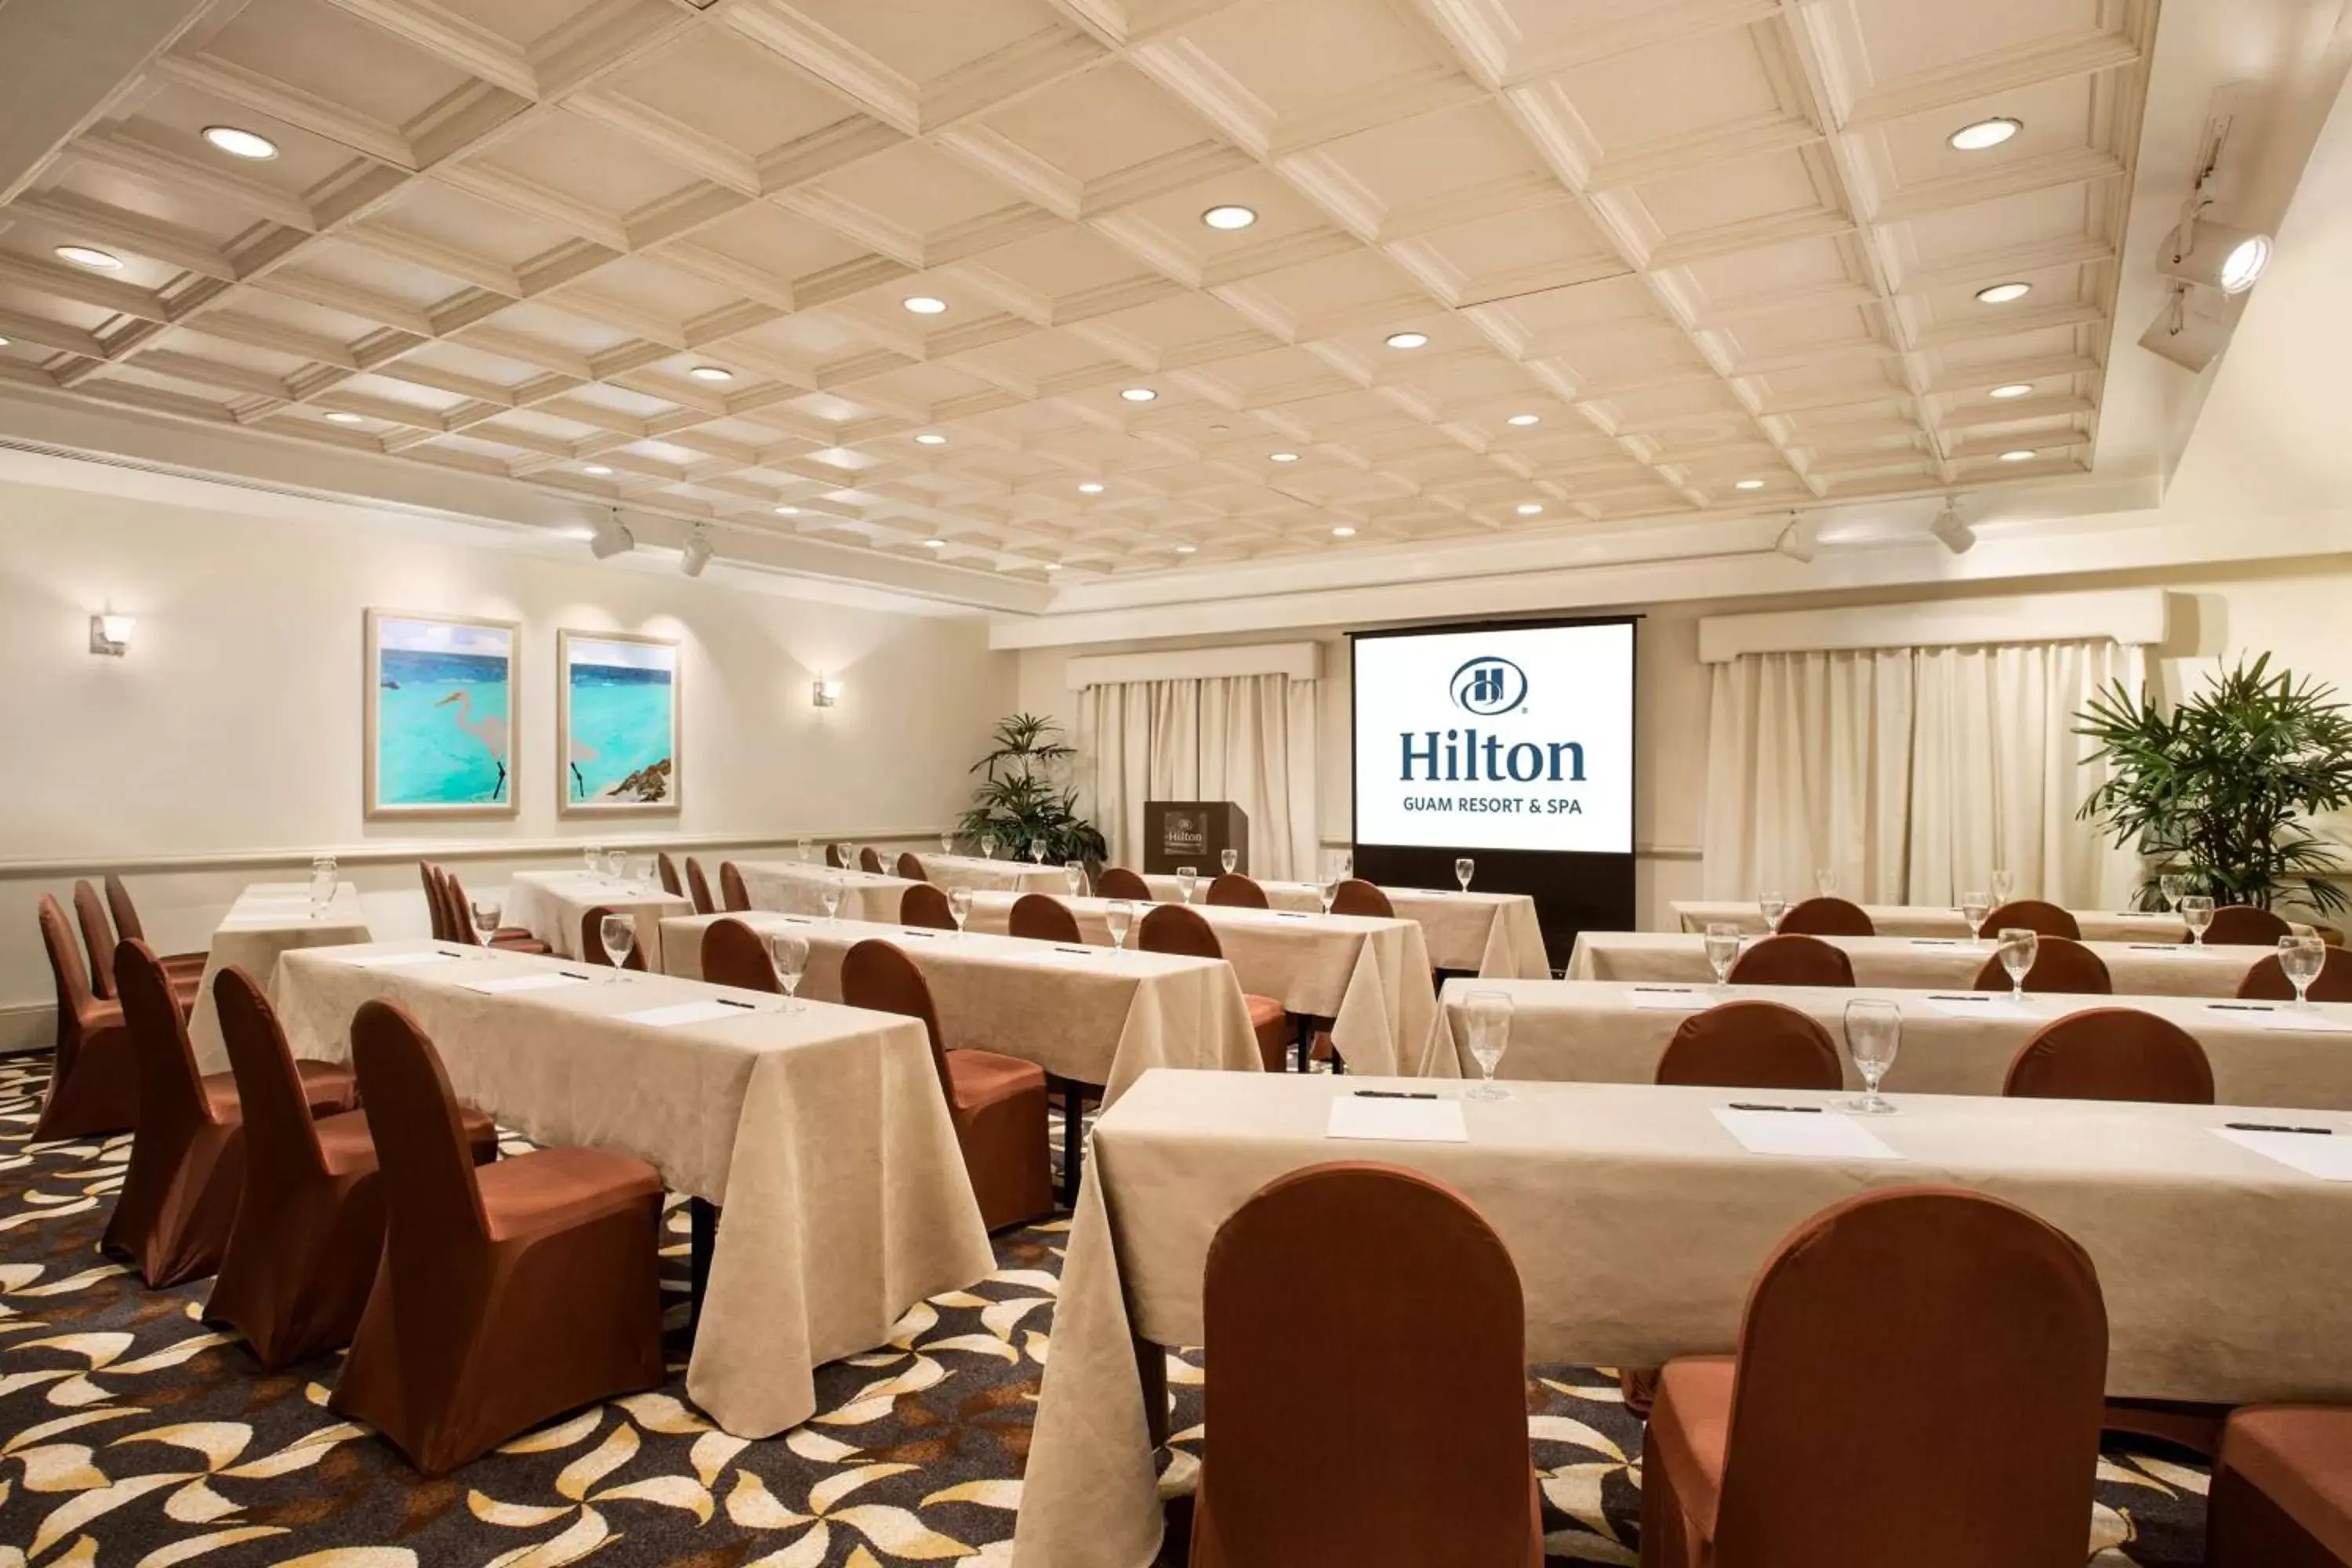 Meeting/conference room in Hilton Guam Resort & Spa